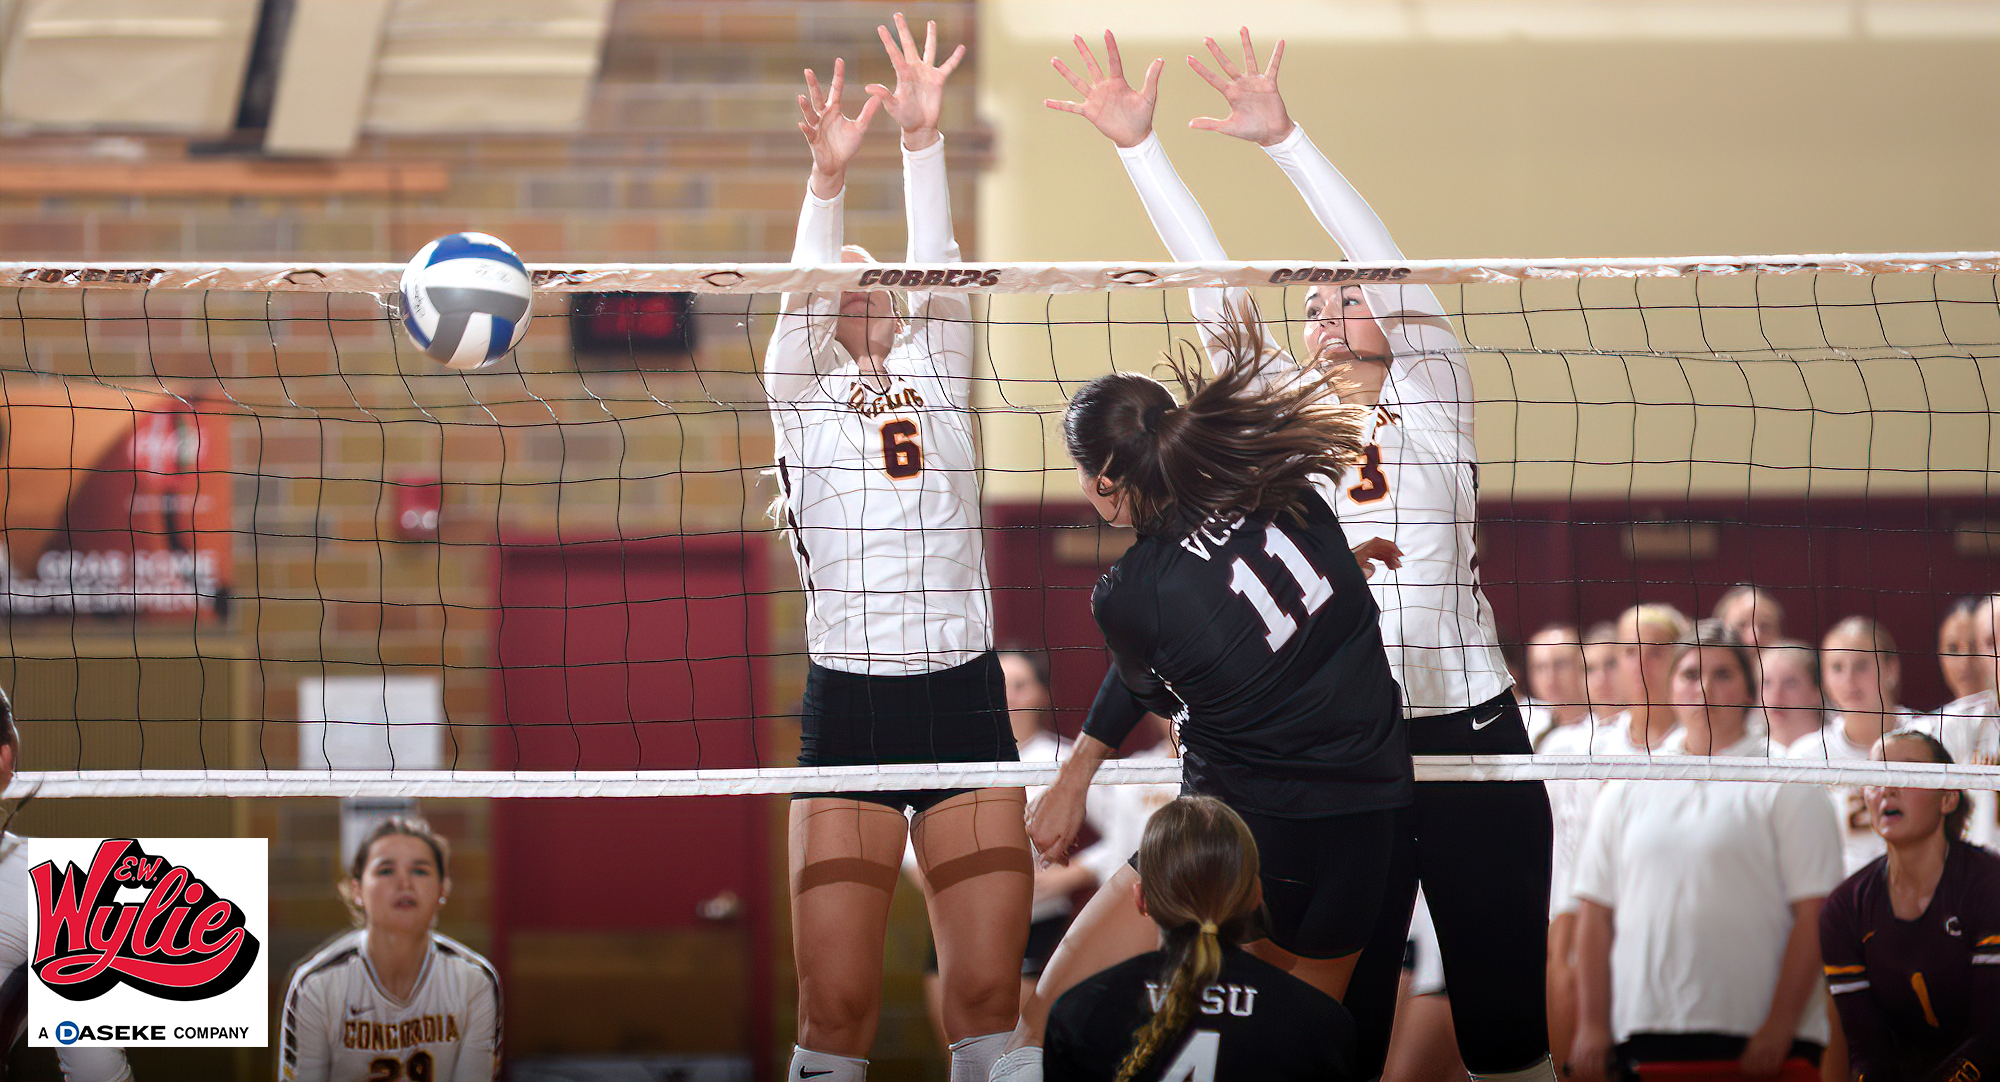 The blocking tandem of Madison Kisch (L) and Mallory Leitner force an attack error during the Cobbers' match with Valley City State.